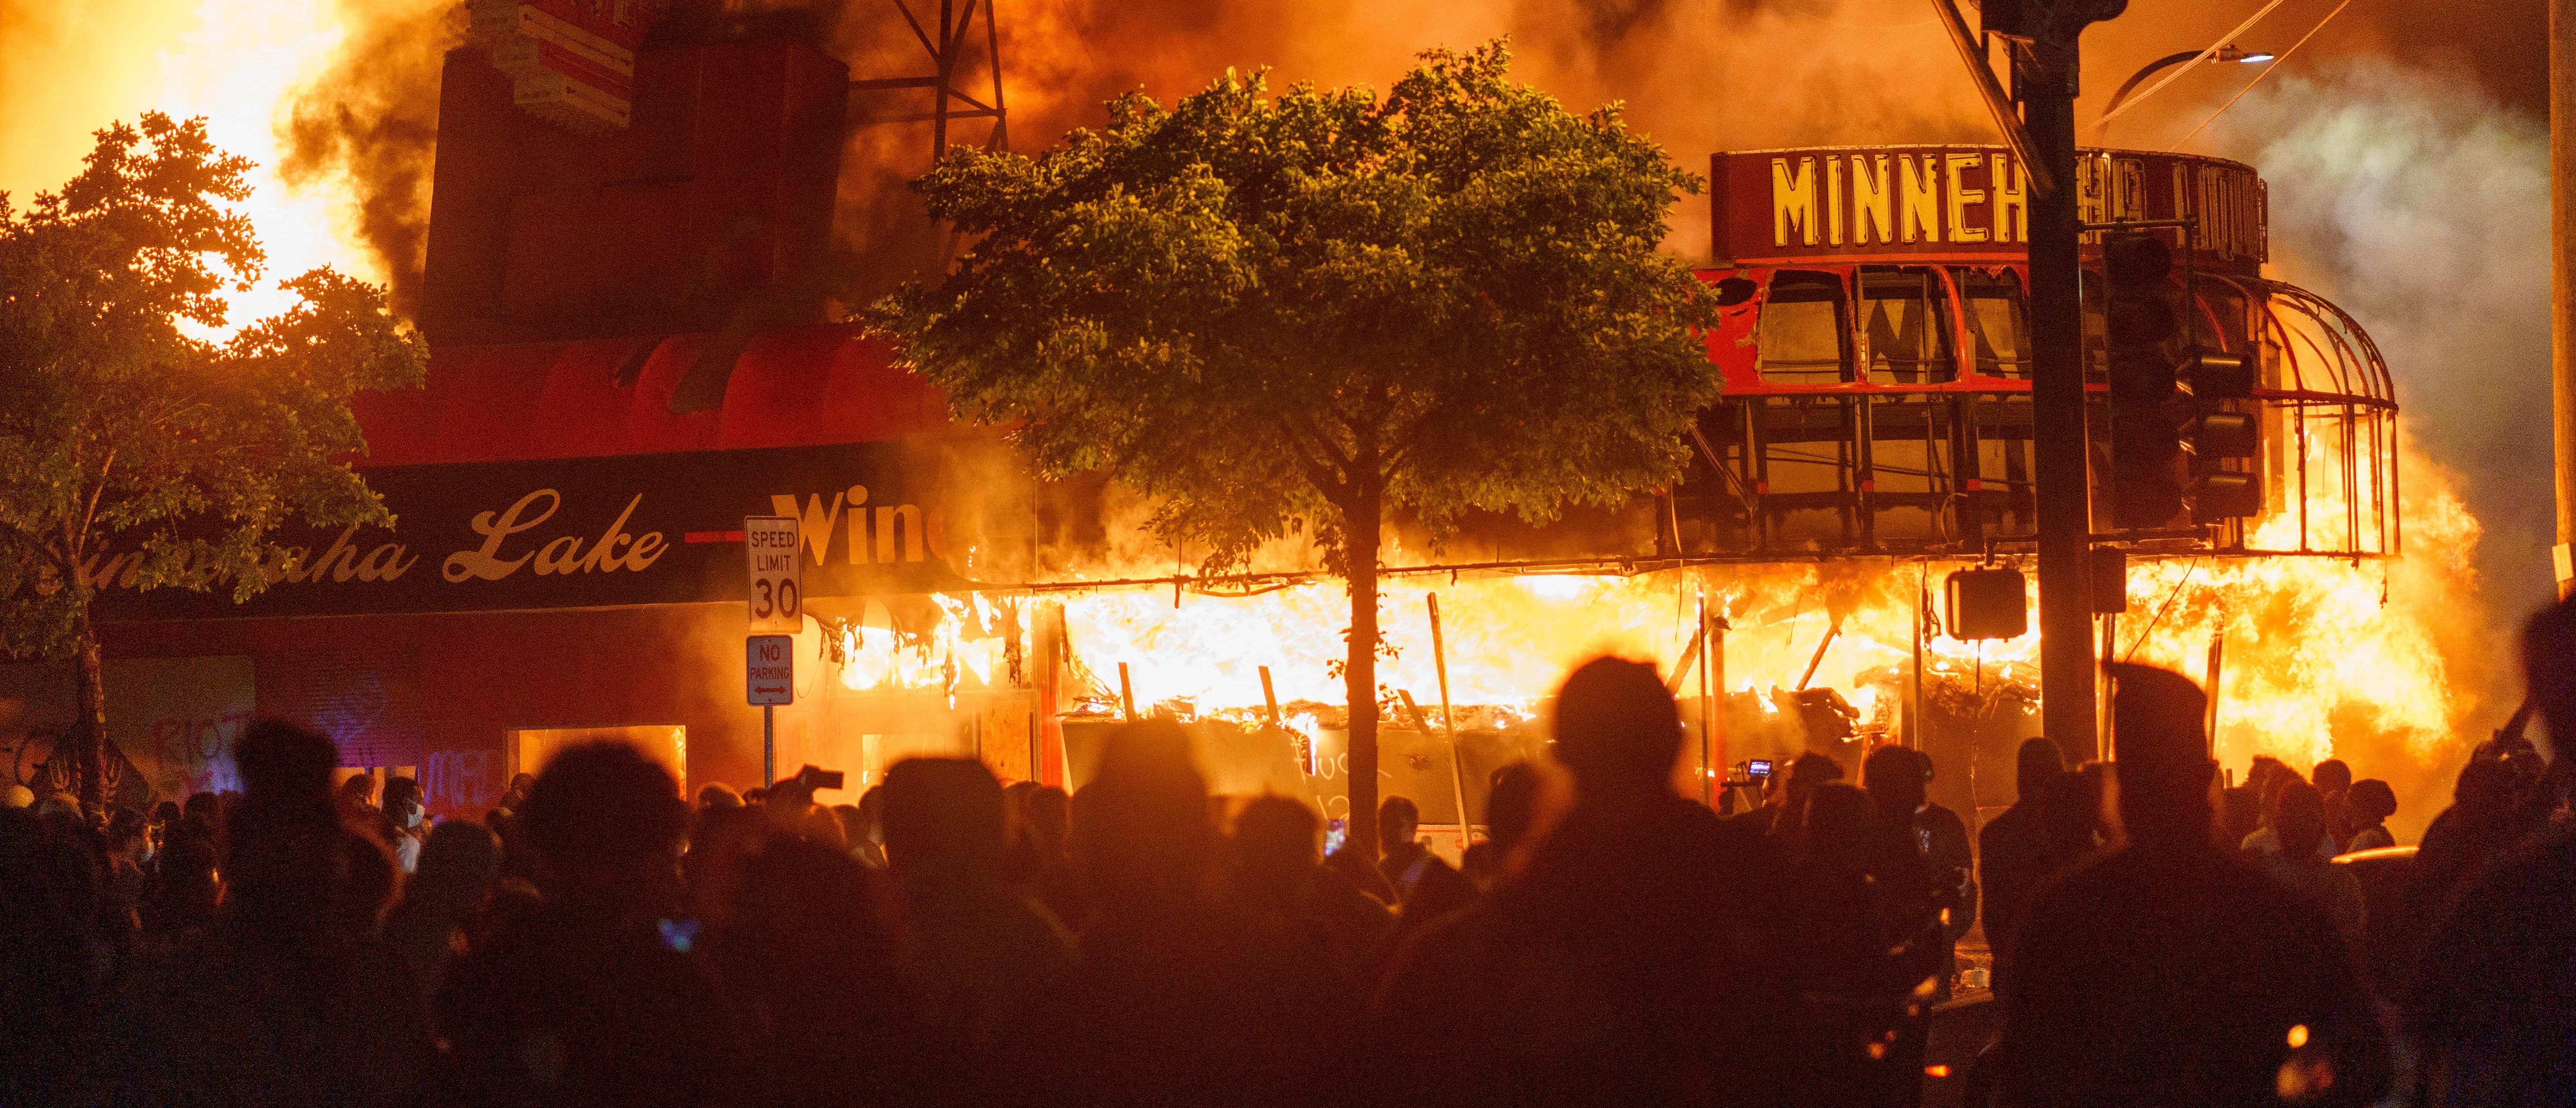 TOPSHOT - Protesters gather in front of a liquor store in flames near the Third Police Precinct on May 28, 2020 in Minneapolis, Minnesota, during a protest over the death of George Floyd, an unarmed black man, who died after a police officer kneeled on his neck for several minutes. - A police precinct in Minnesota went up in flames late on May 28 in a third day of demonstrations as the so-called Twin Cities of Minneapolis and St. Paul seethed over the shocking police killing of a handcuffed black man. The precinct, which police had abandoned, burned after a group of protesters pushed through barriers around the building, breaking windows and chanting slogans. A much larger crowd demonstrated as the building went up in flames. (Photo by kerem yucel / AFP) (Photo by KEREM YUCEL/AFP via Getty Images)